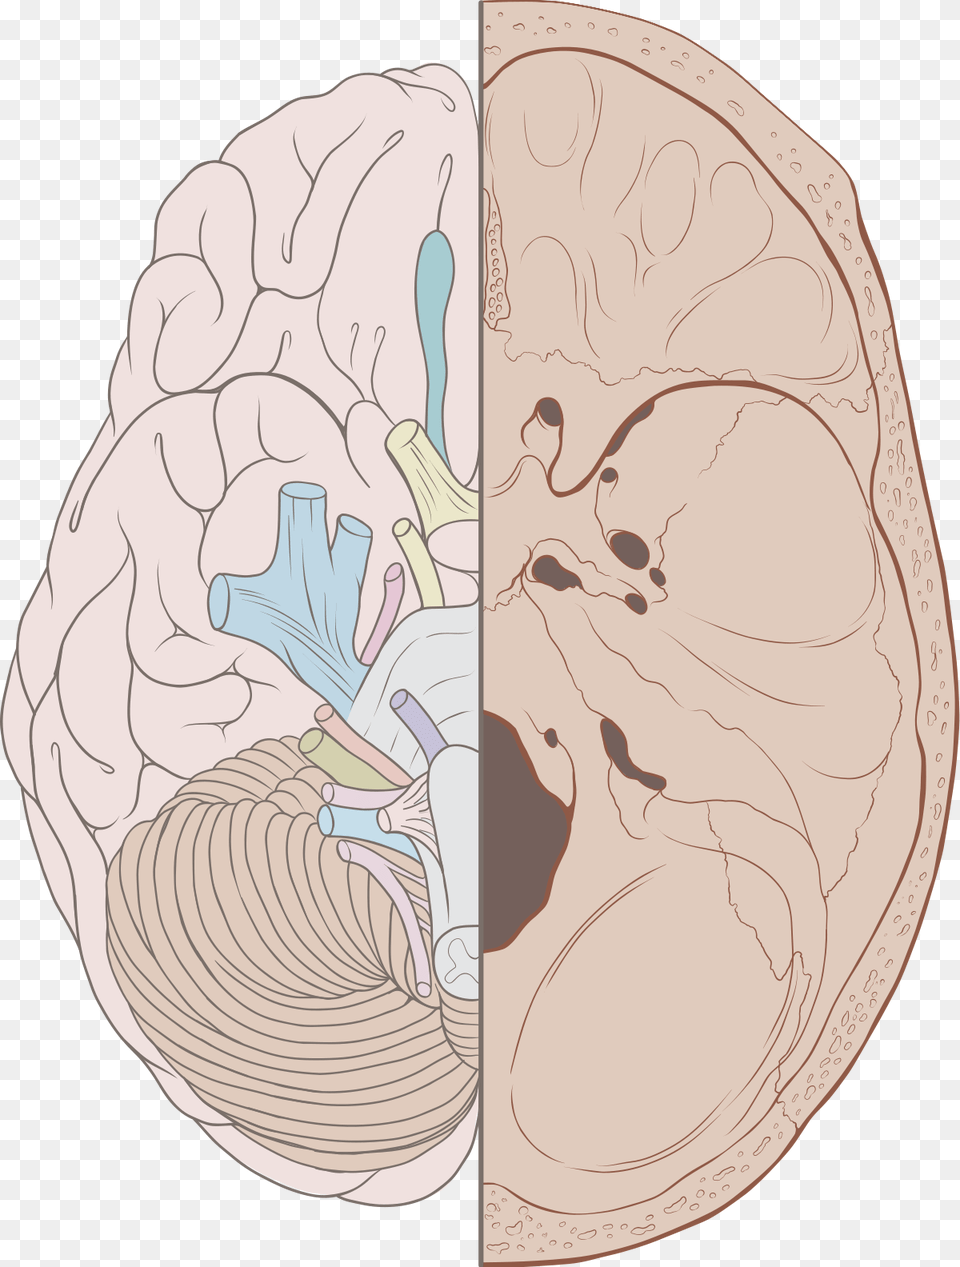 Cranial Nerves On Brain And Skull, Ct Scan Png